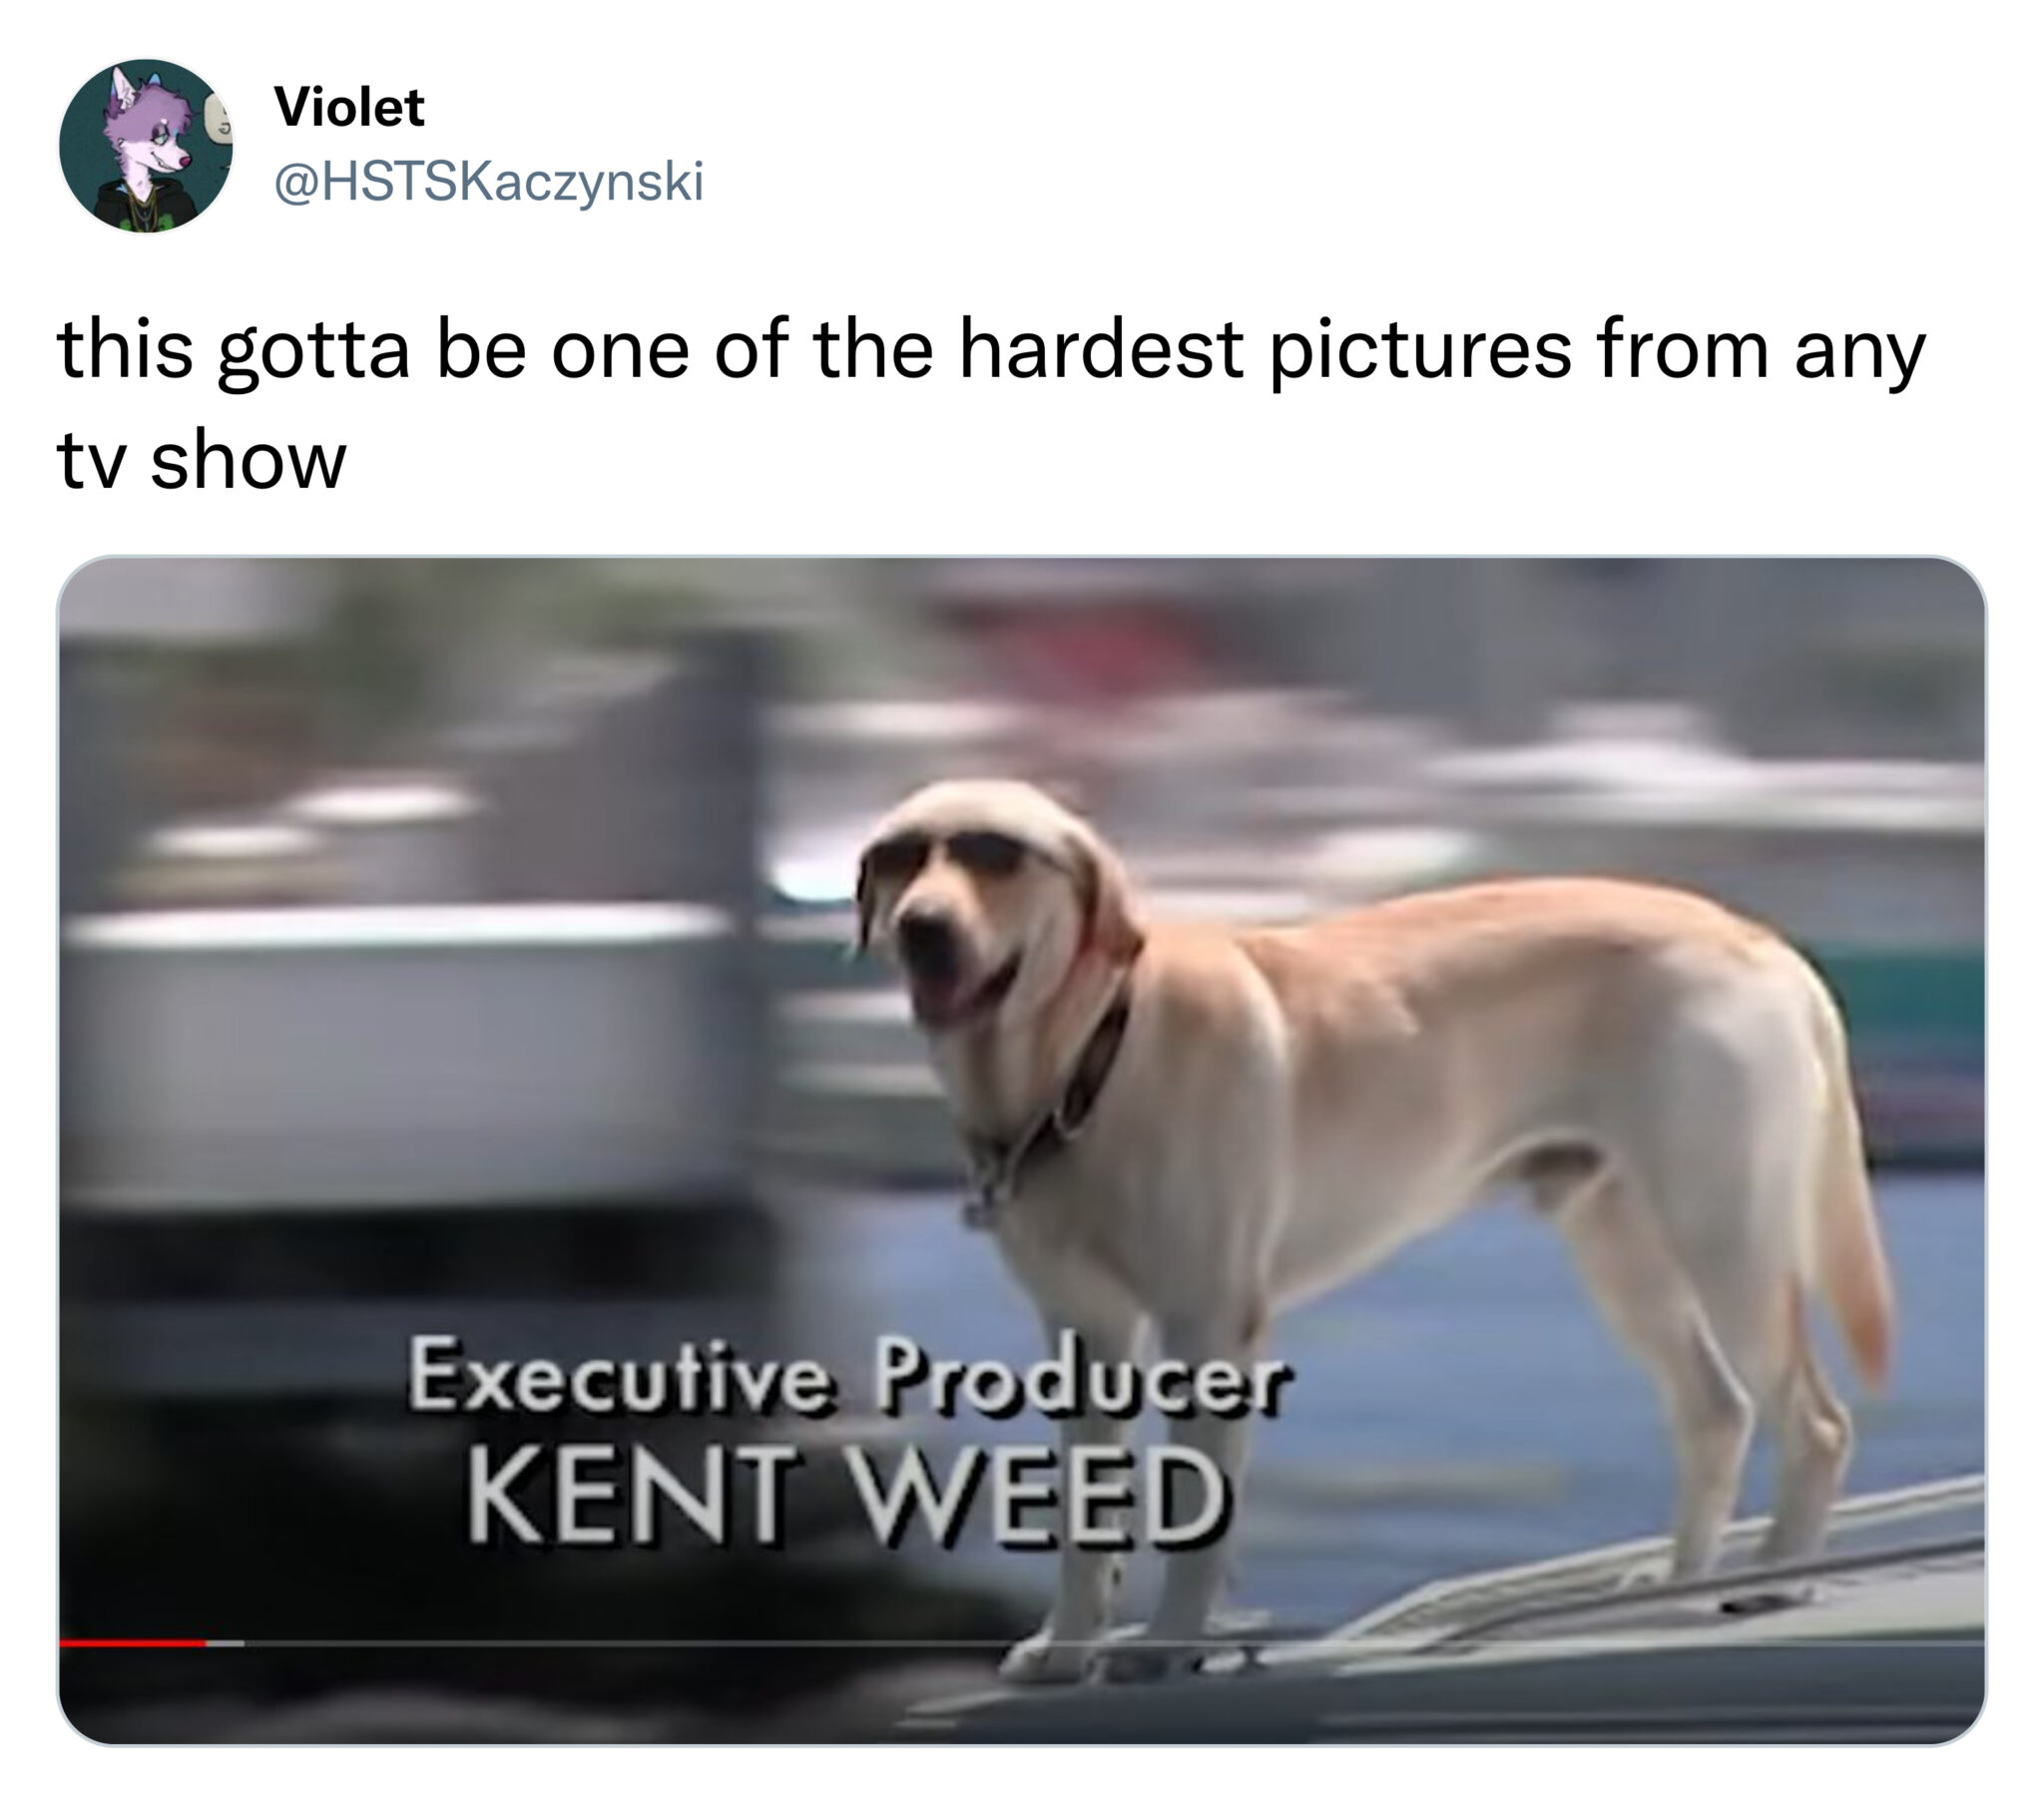 savage tweets - photo caption - Violet this gotta be one of the hardest pictures from any tv show Executive Producer Kent Weed